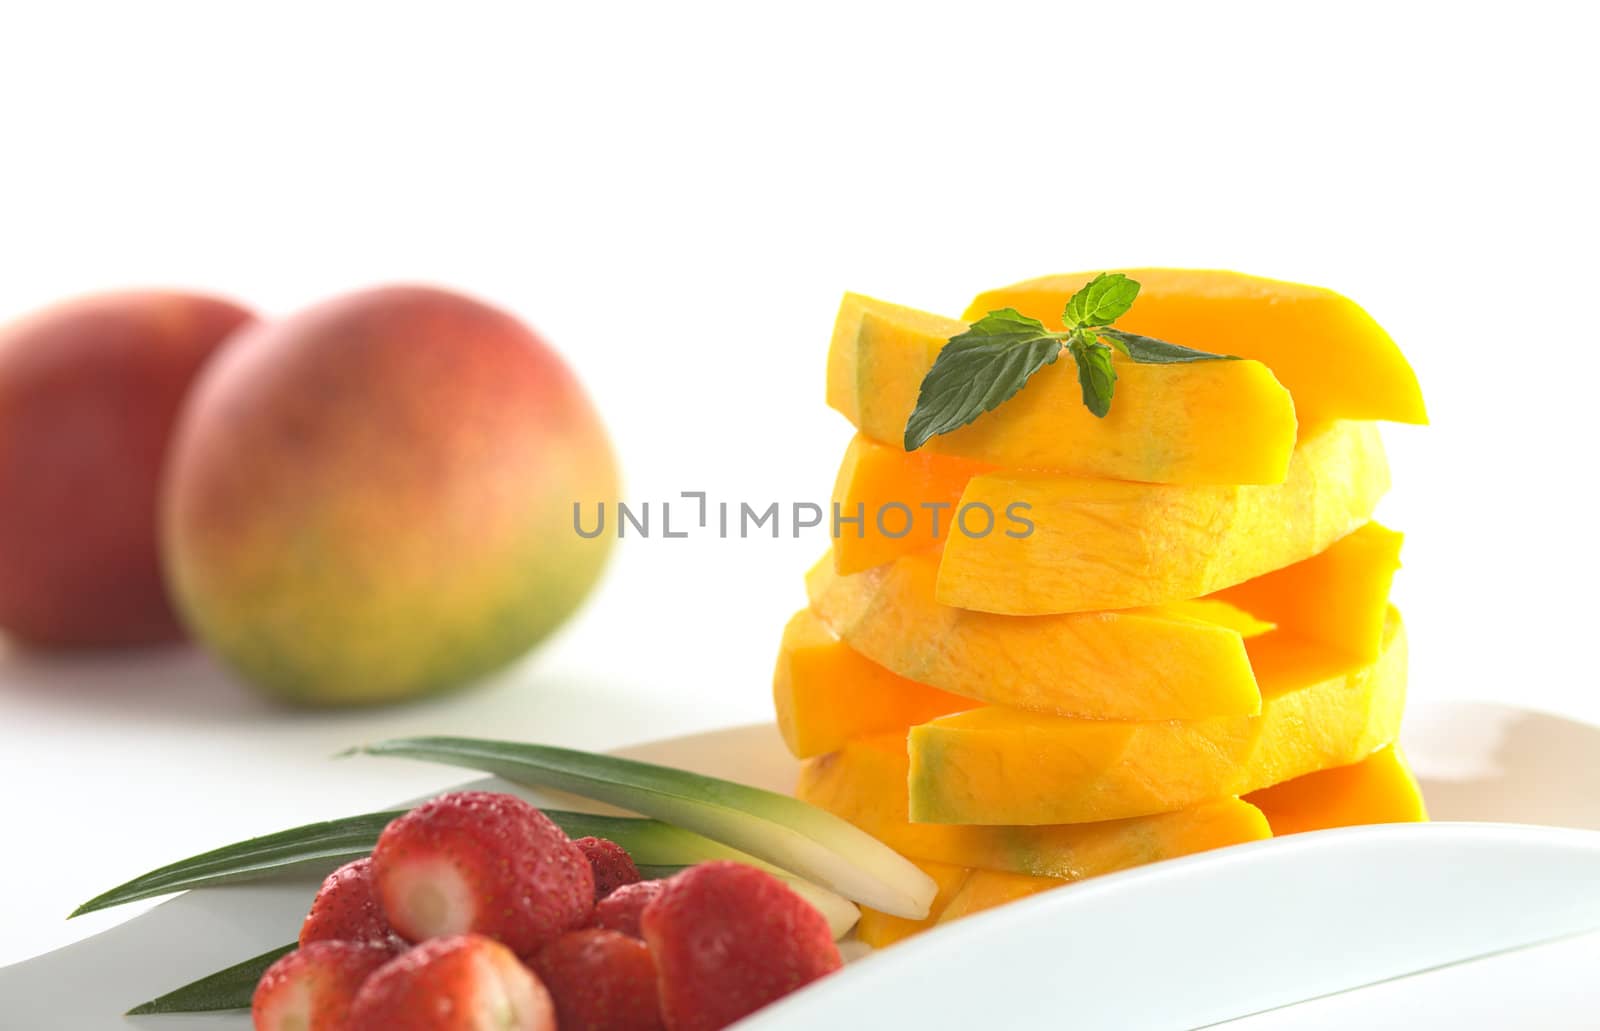 Mango sticks arranged in a pile garnished with mint leaf and strawberries in the foreground (Selective Focus, Focus on the mint leaf and the front of the mango pile)